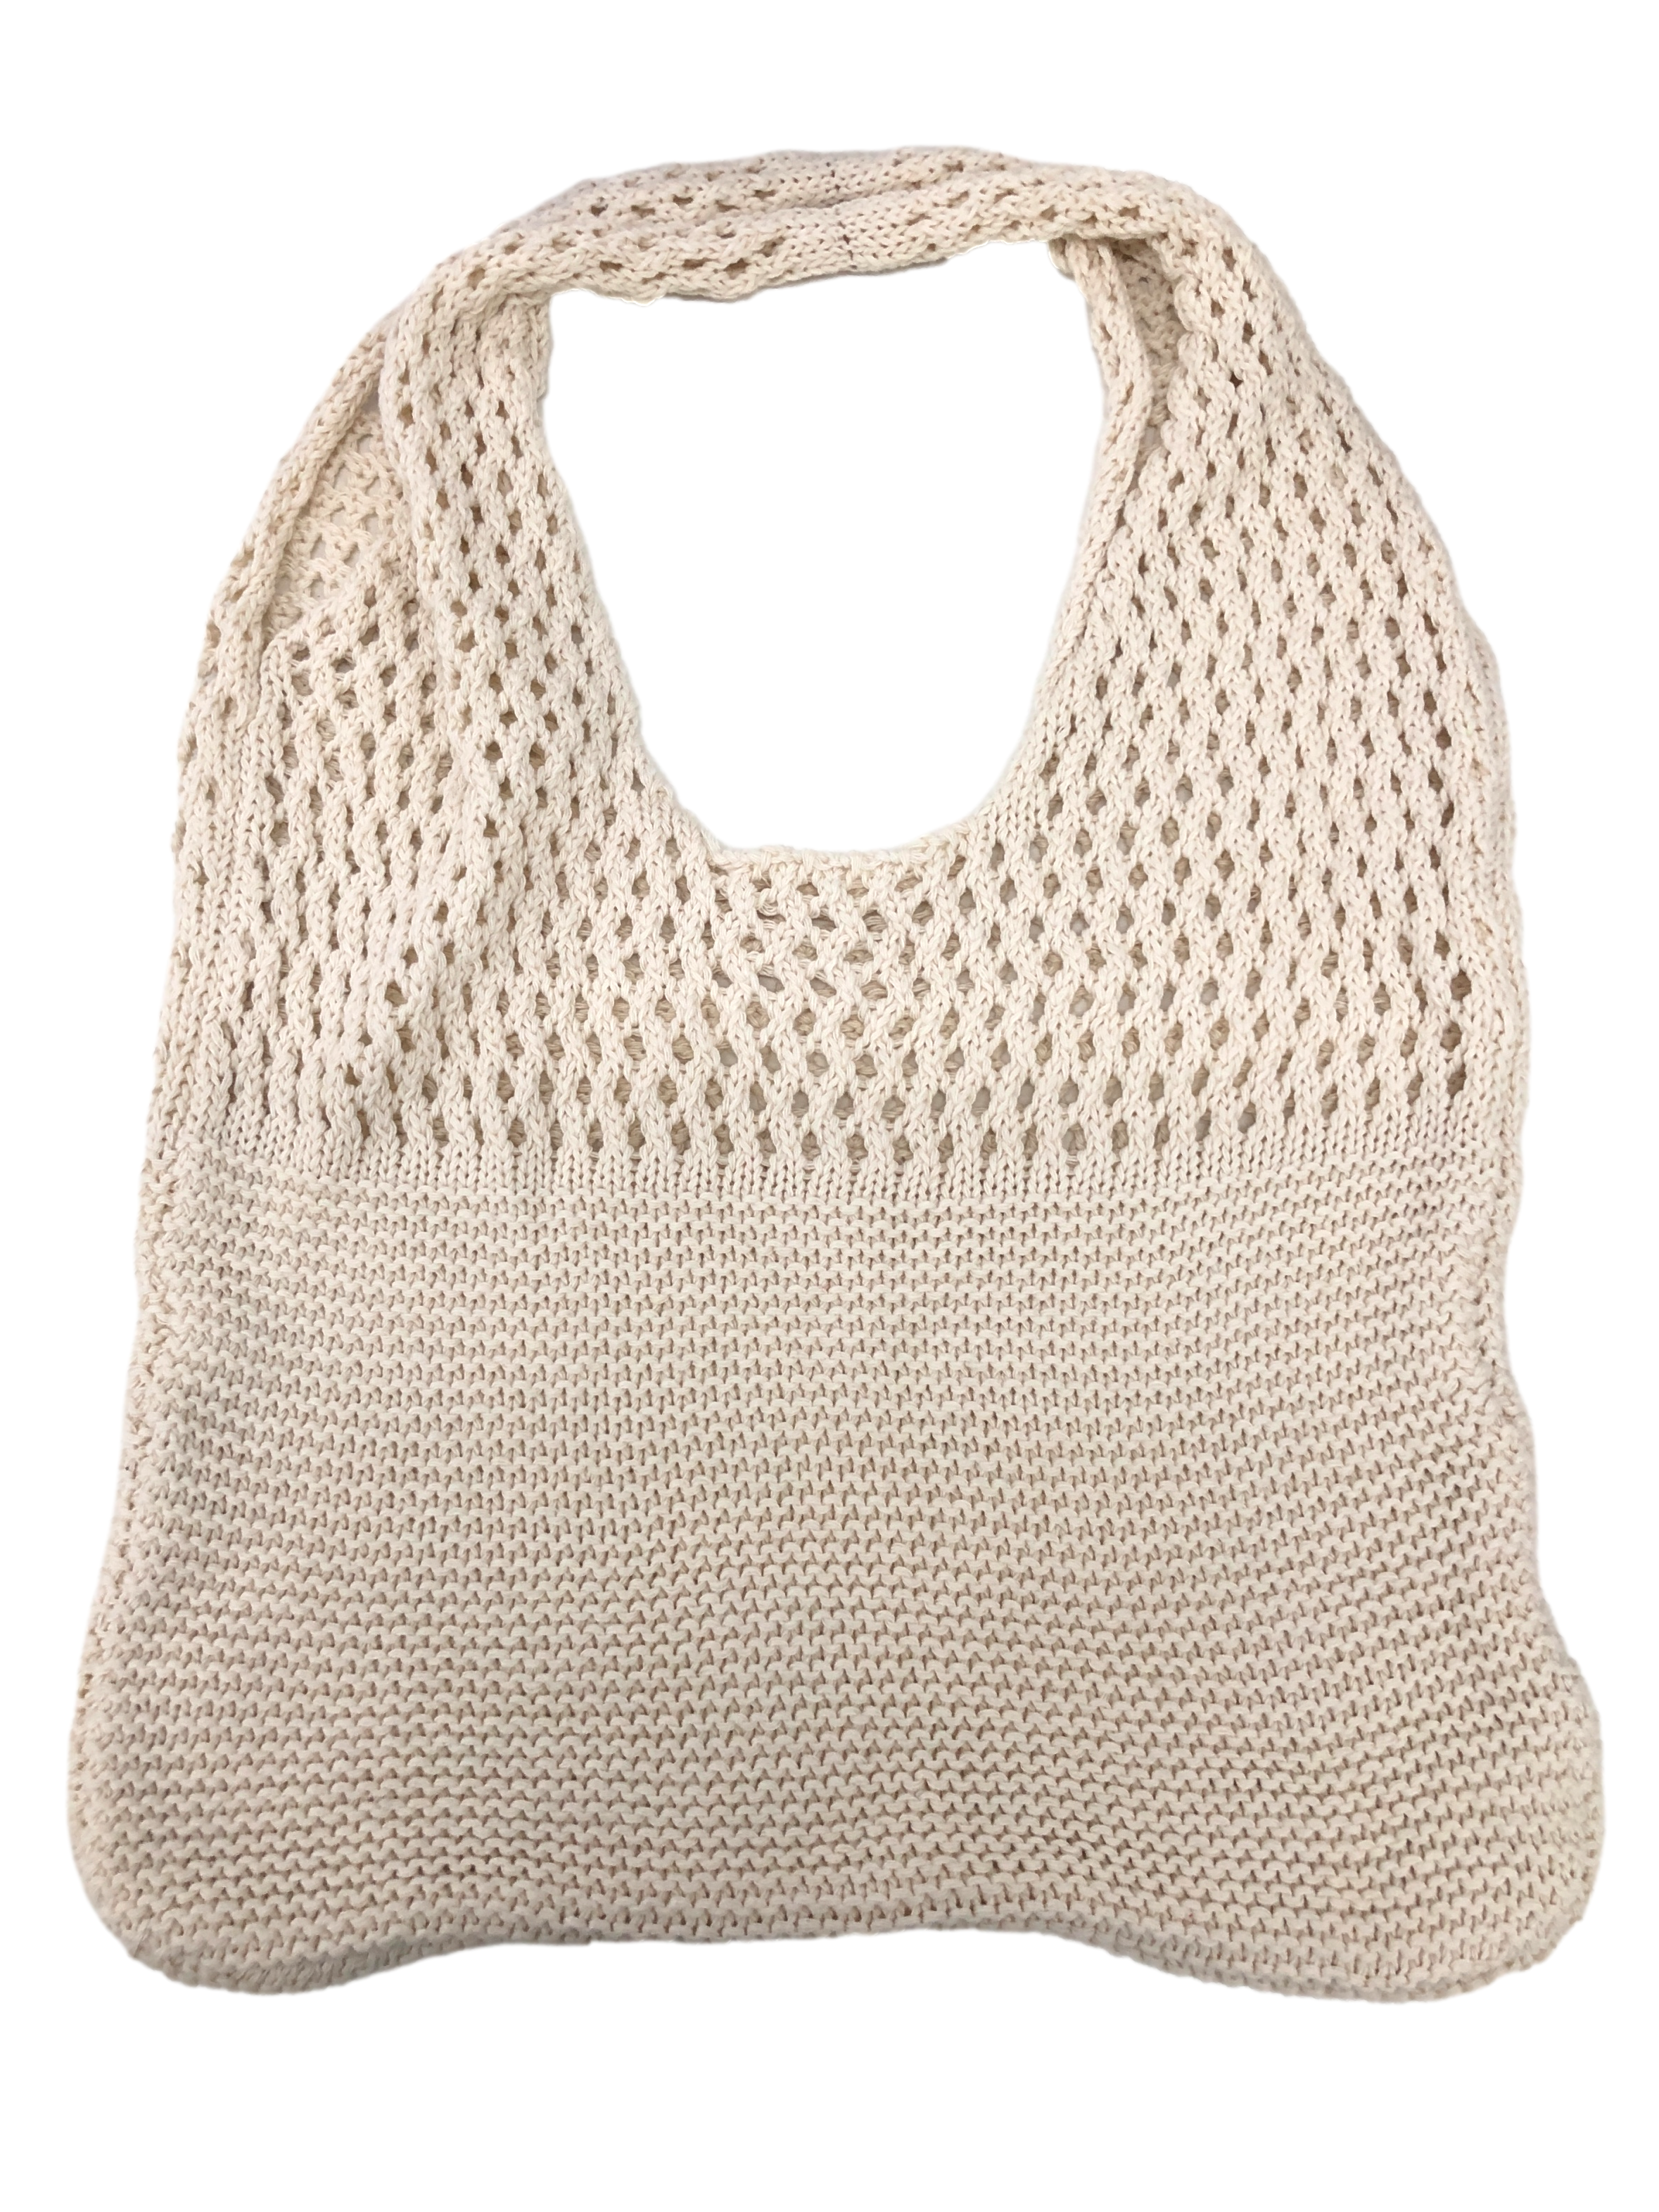 Cream Knitted Tote Bag